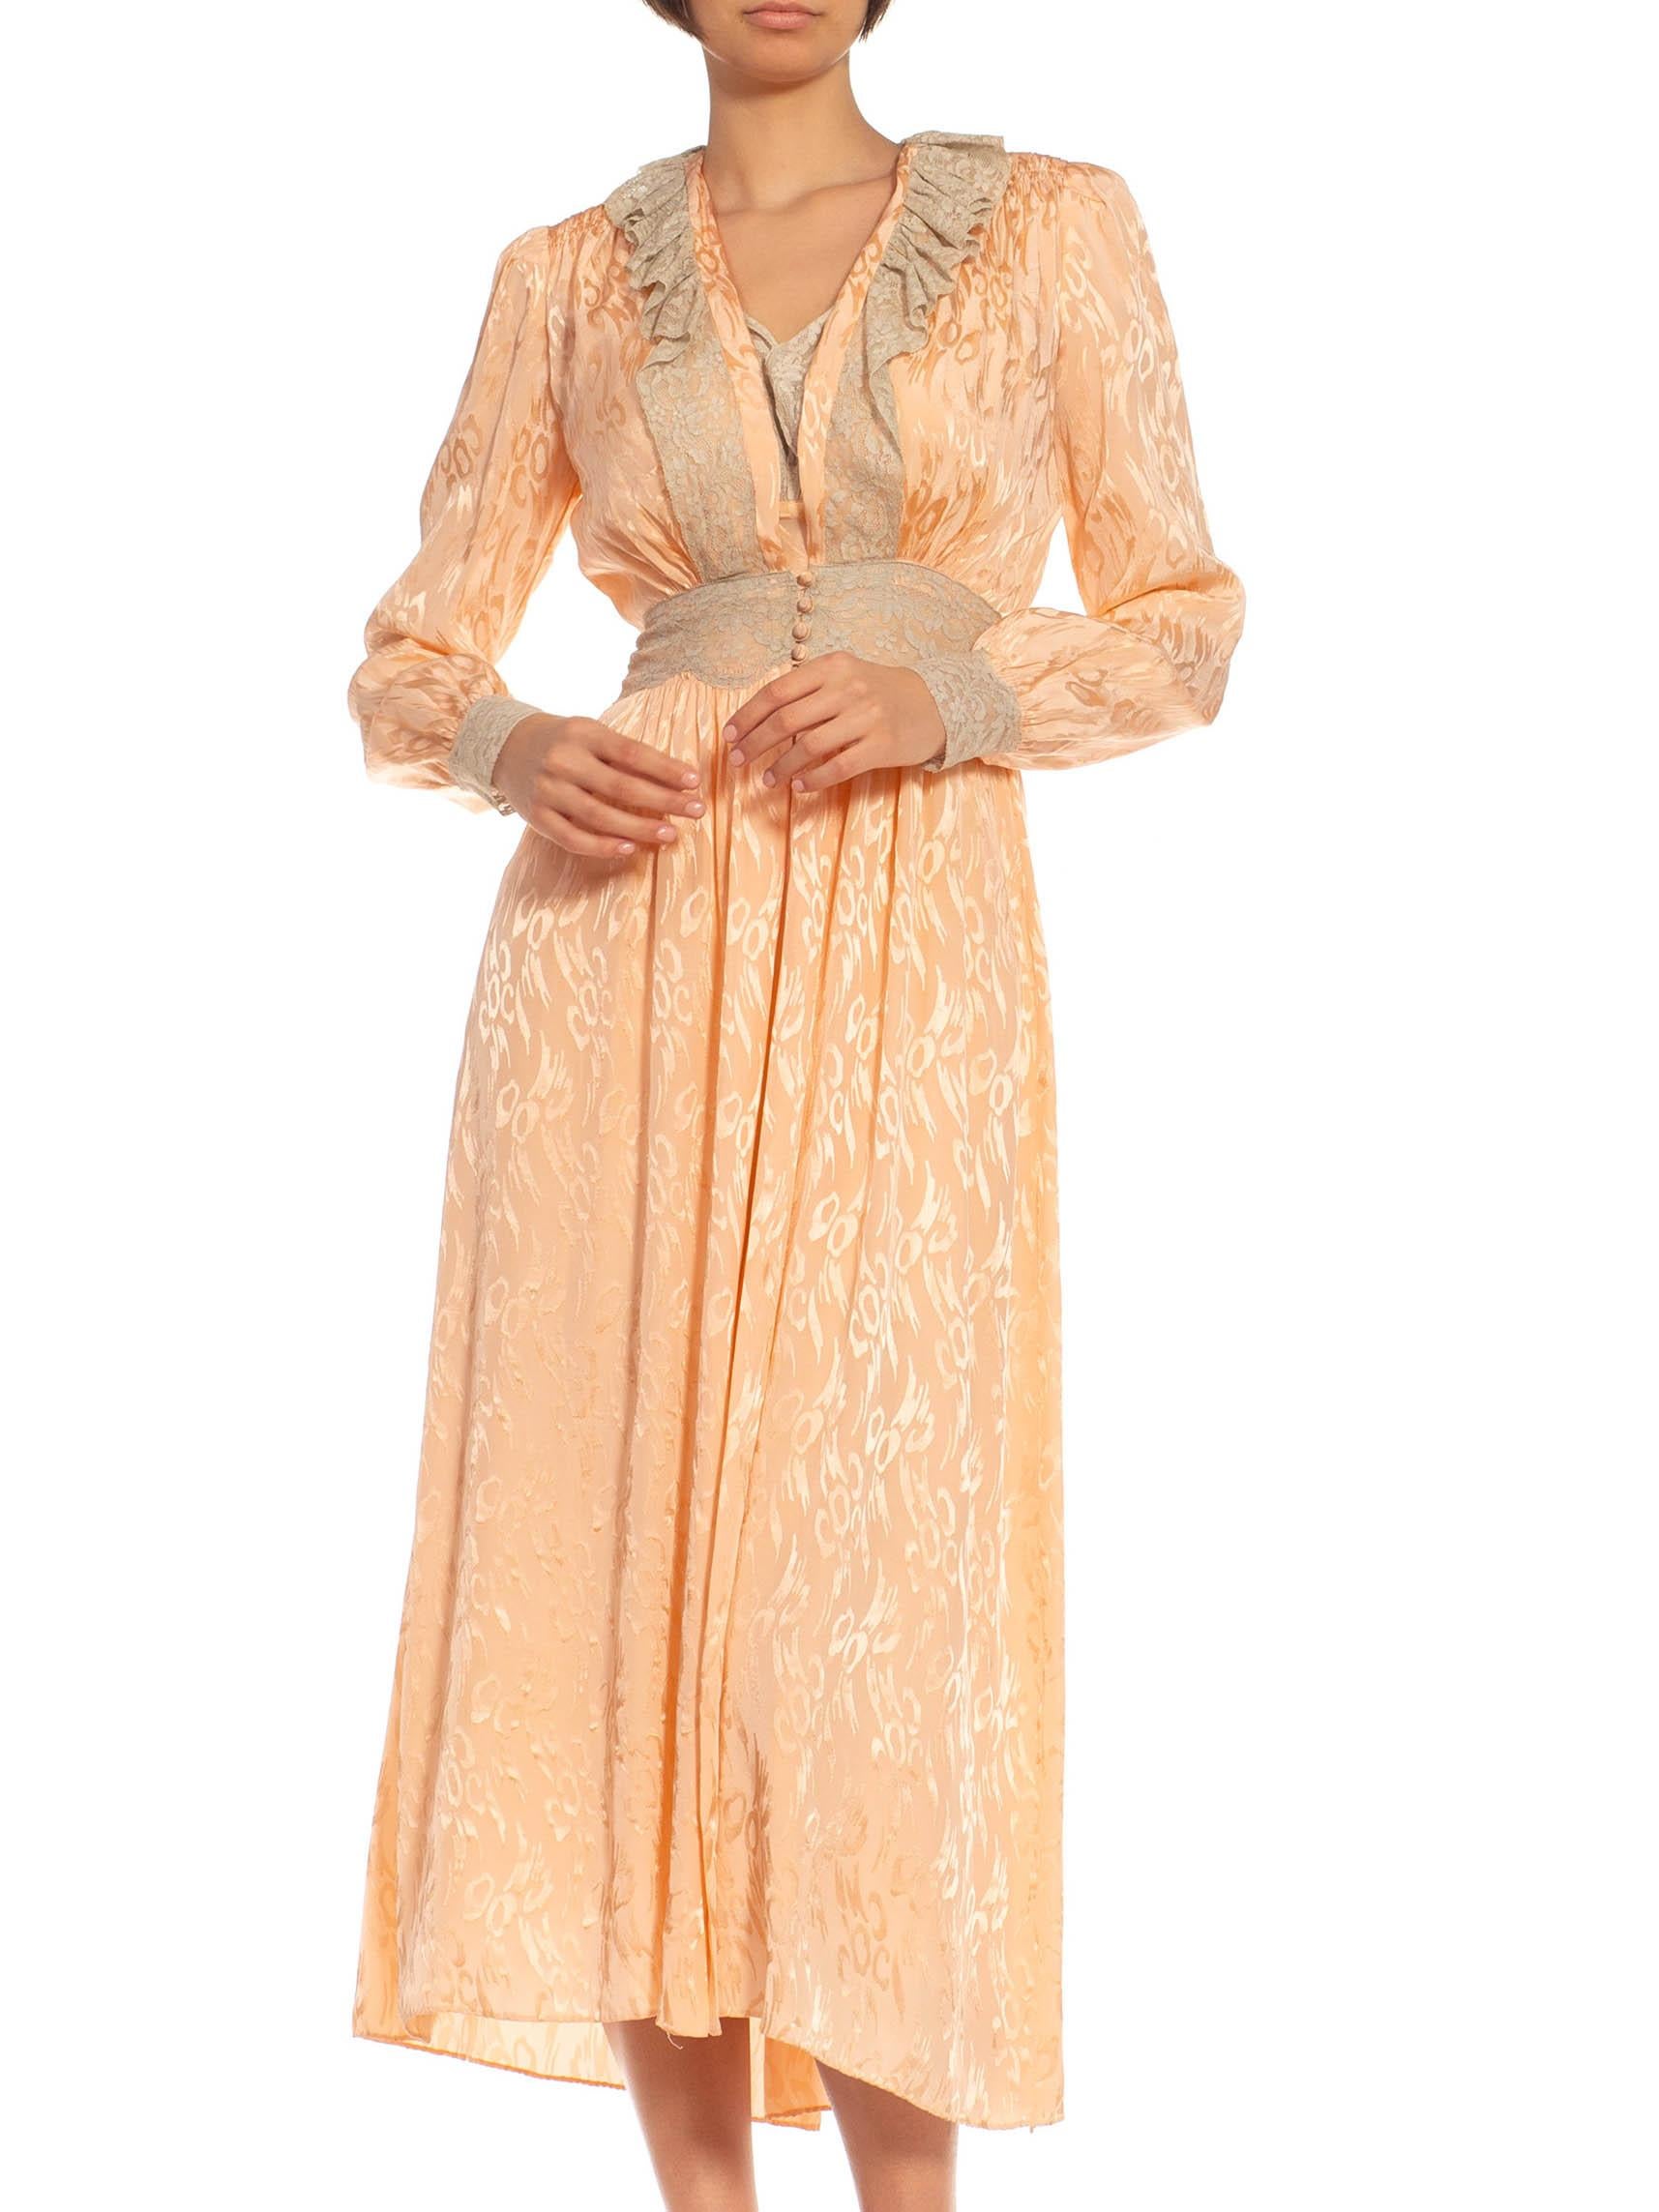 1940S Peach & Cream Lace Bias Cut Slip Dress With Jacket For Sale 3